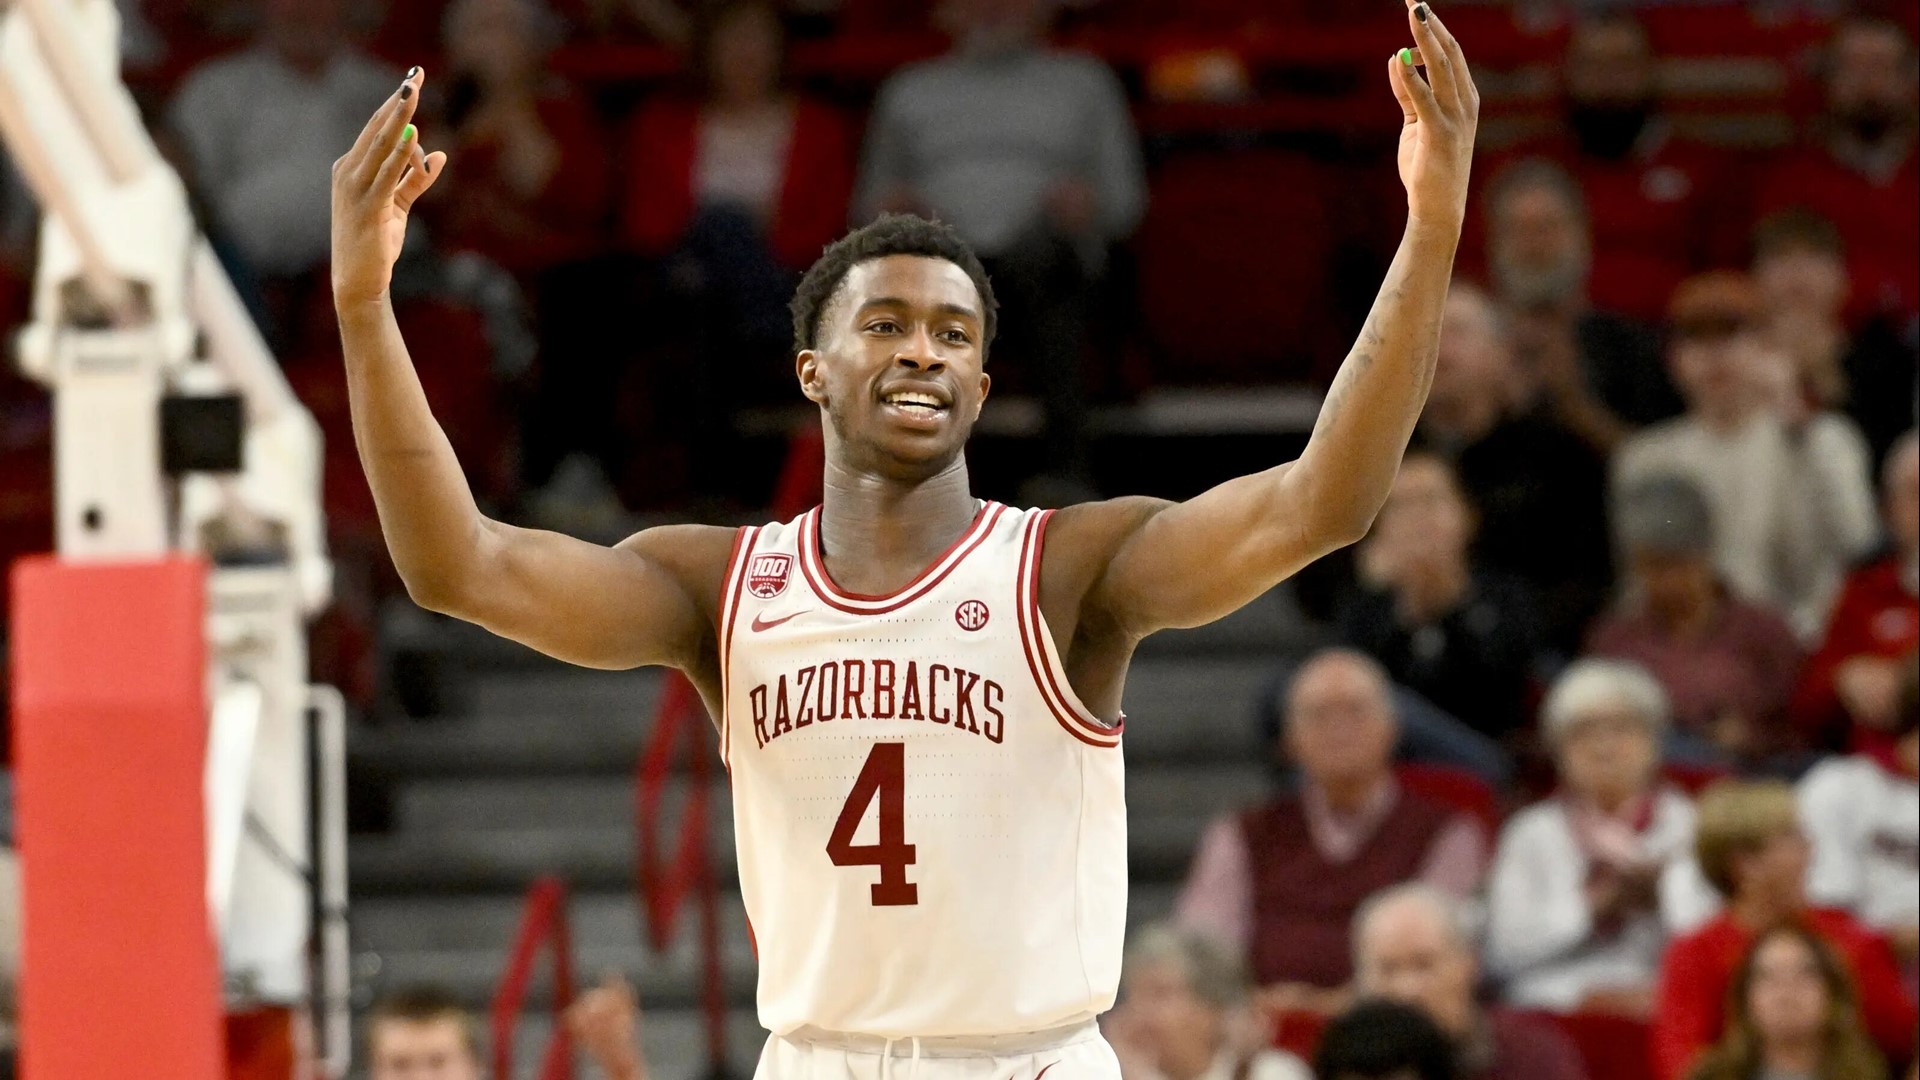 "No matter where this journey takes me, Arkansas will always be home to my family and me," Davis said in his announcement.